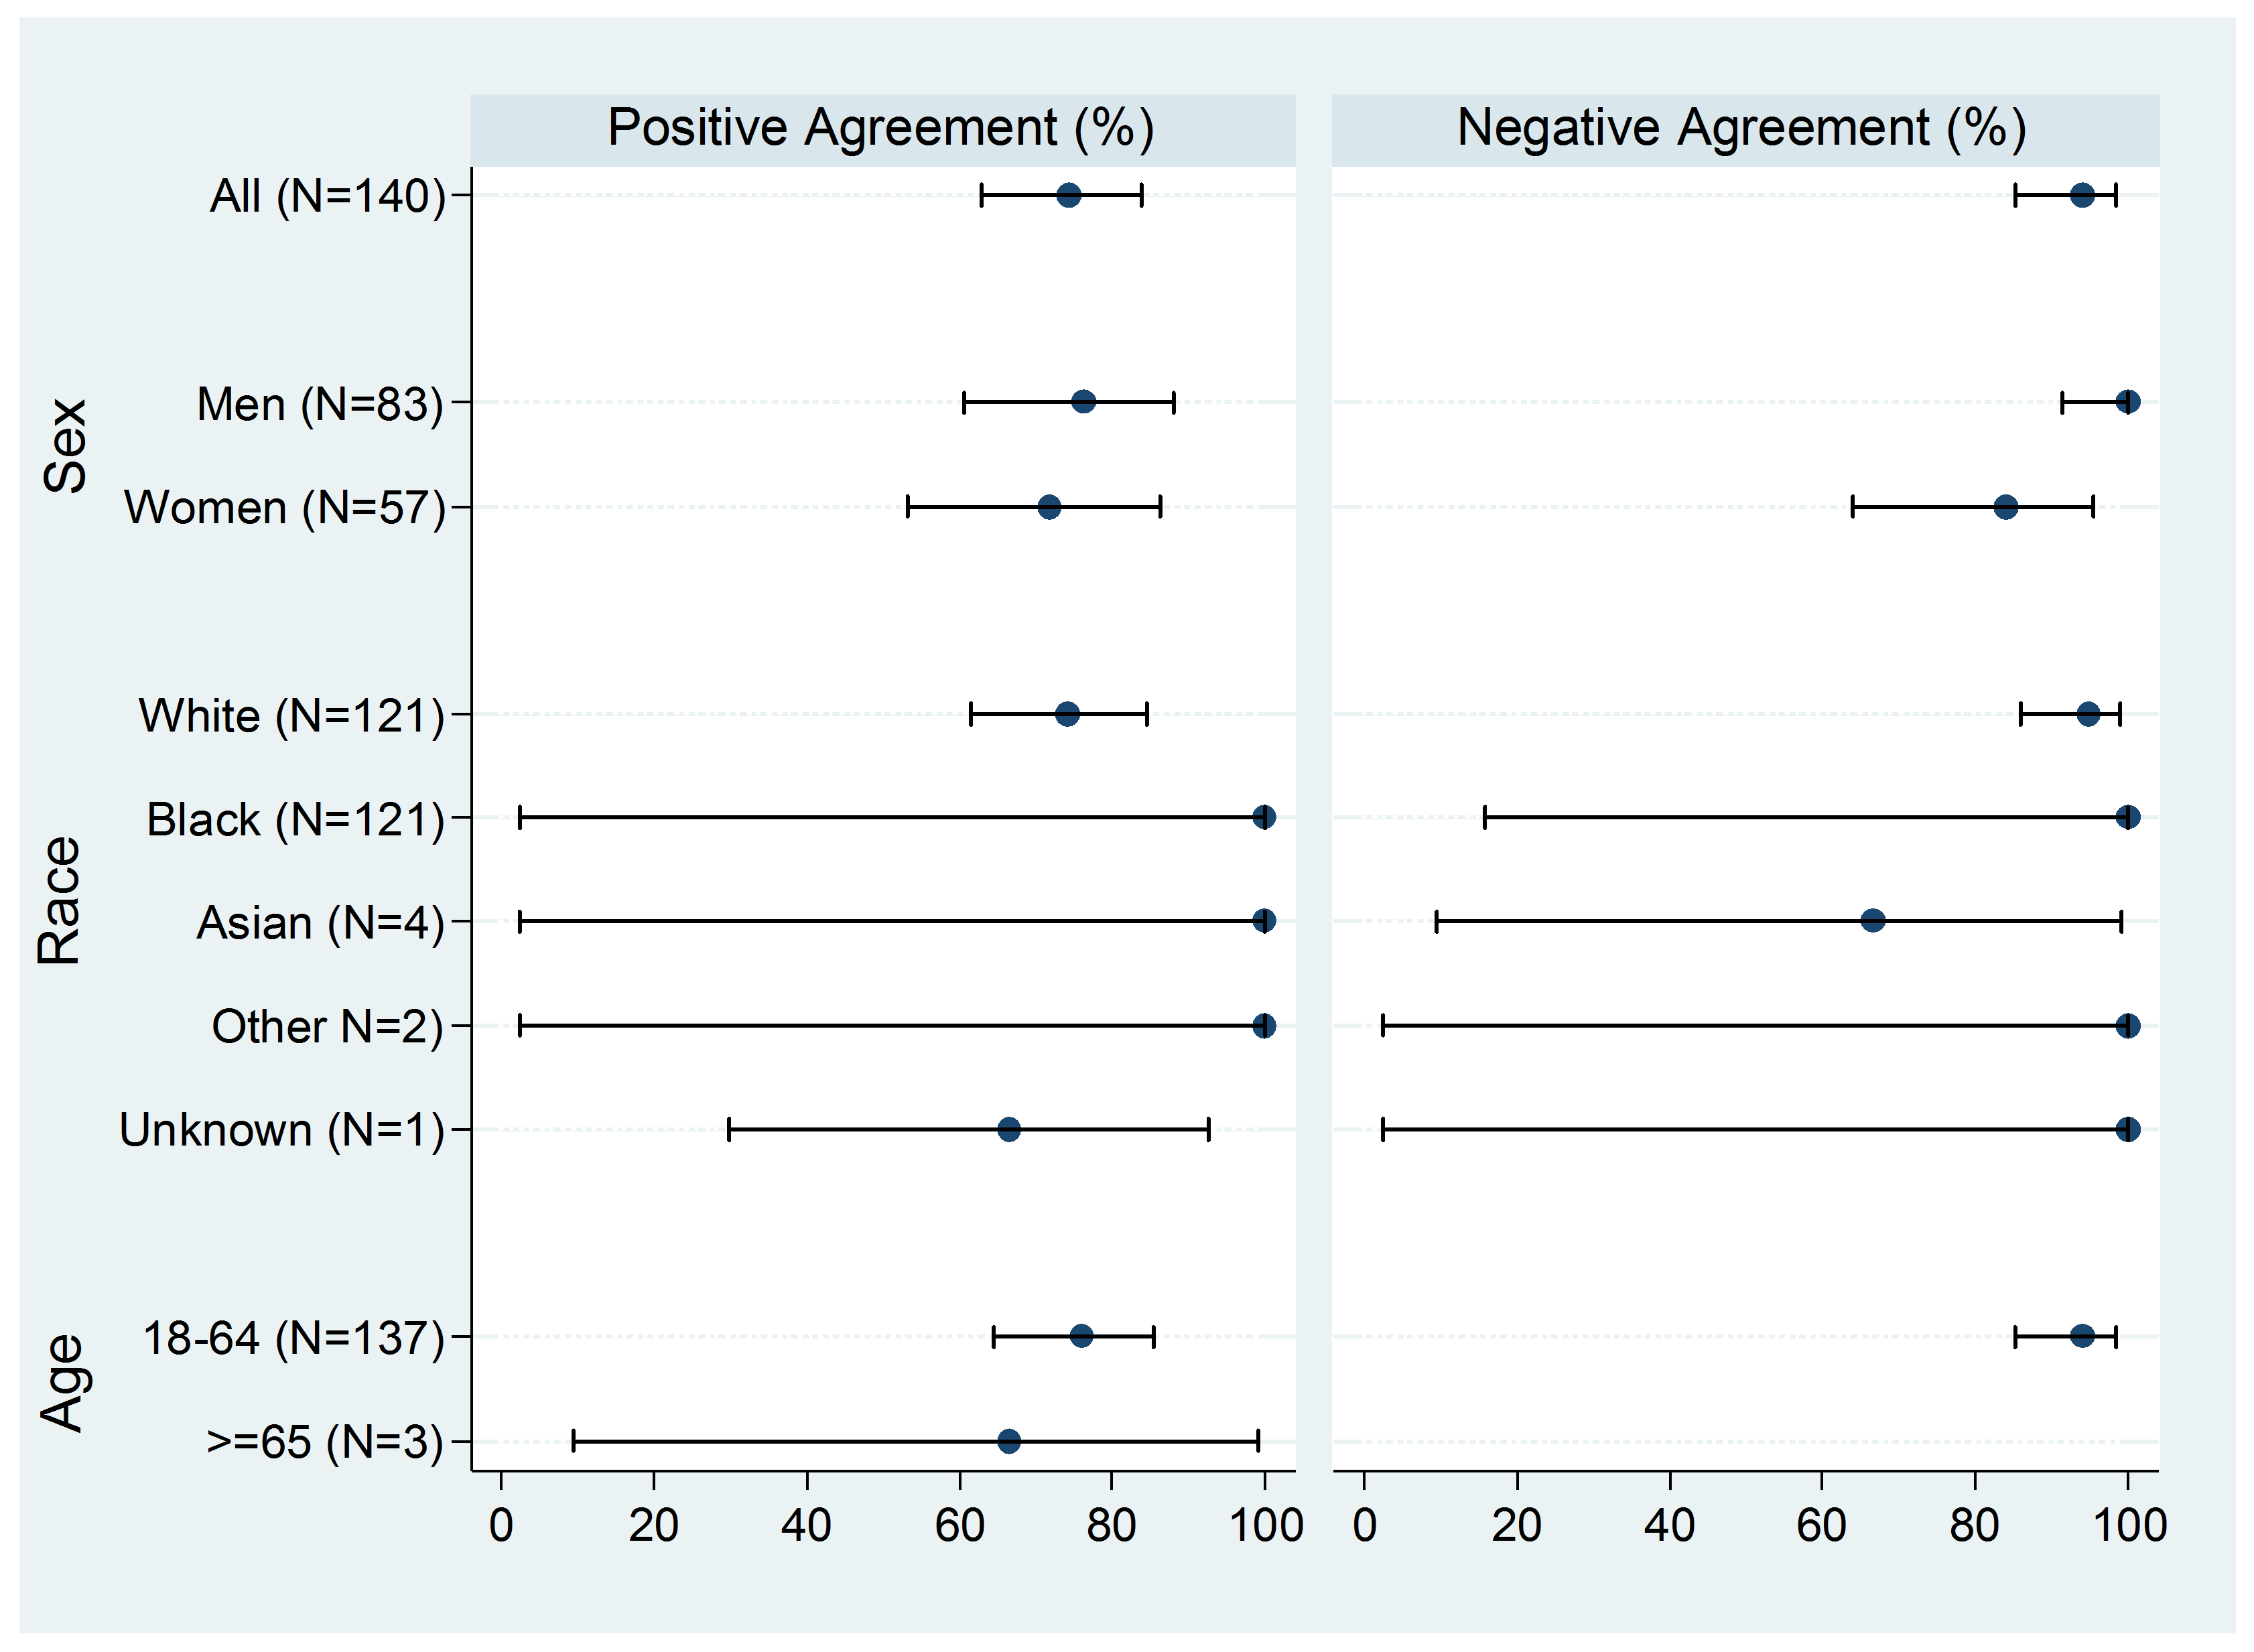 summarizes efficacy results by subgroup